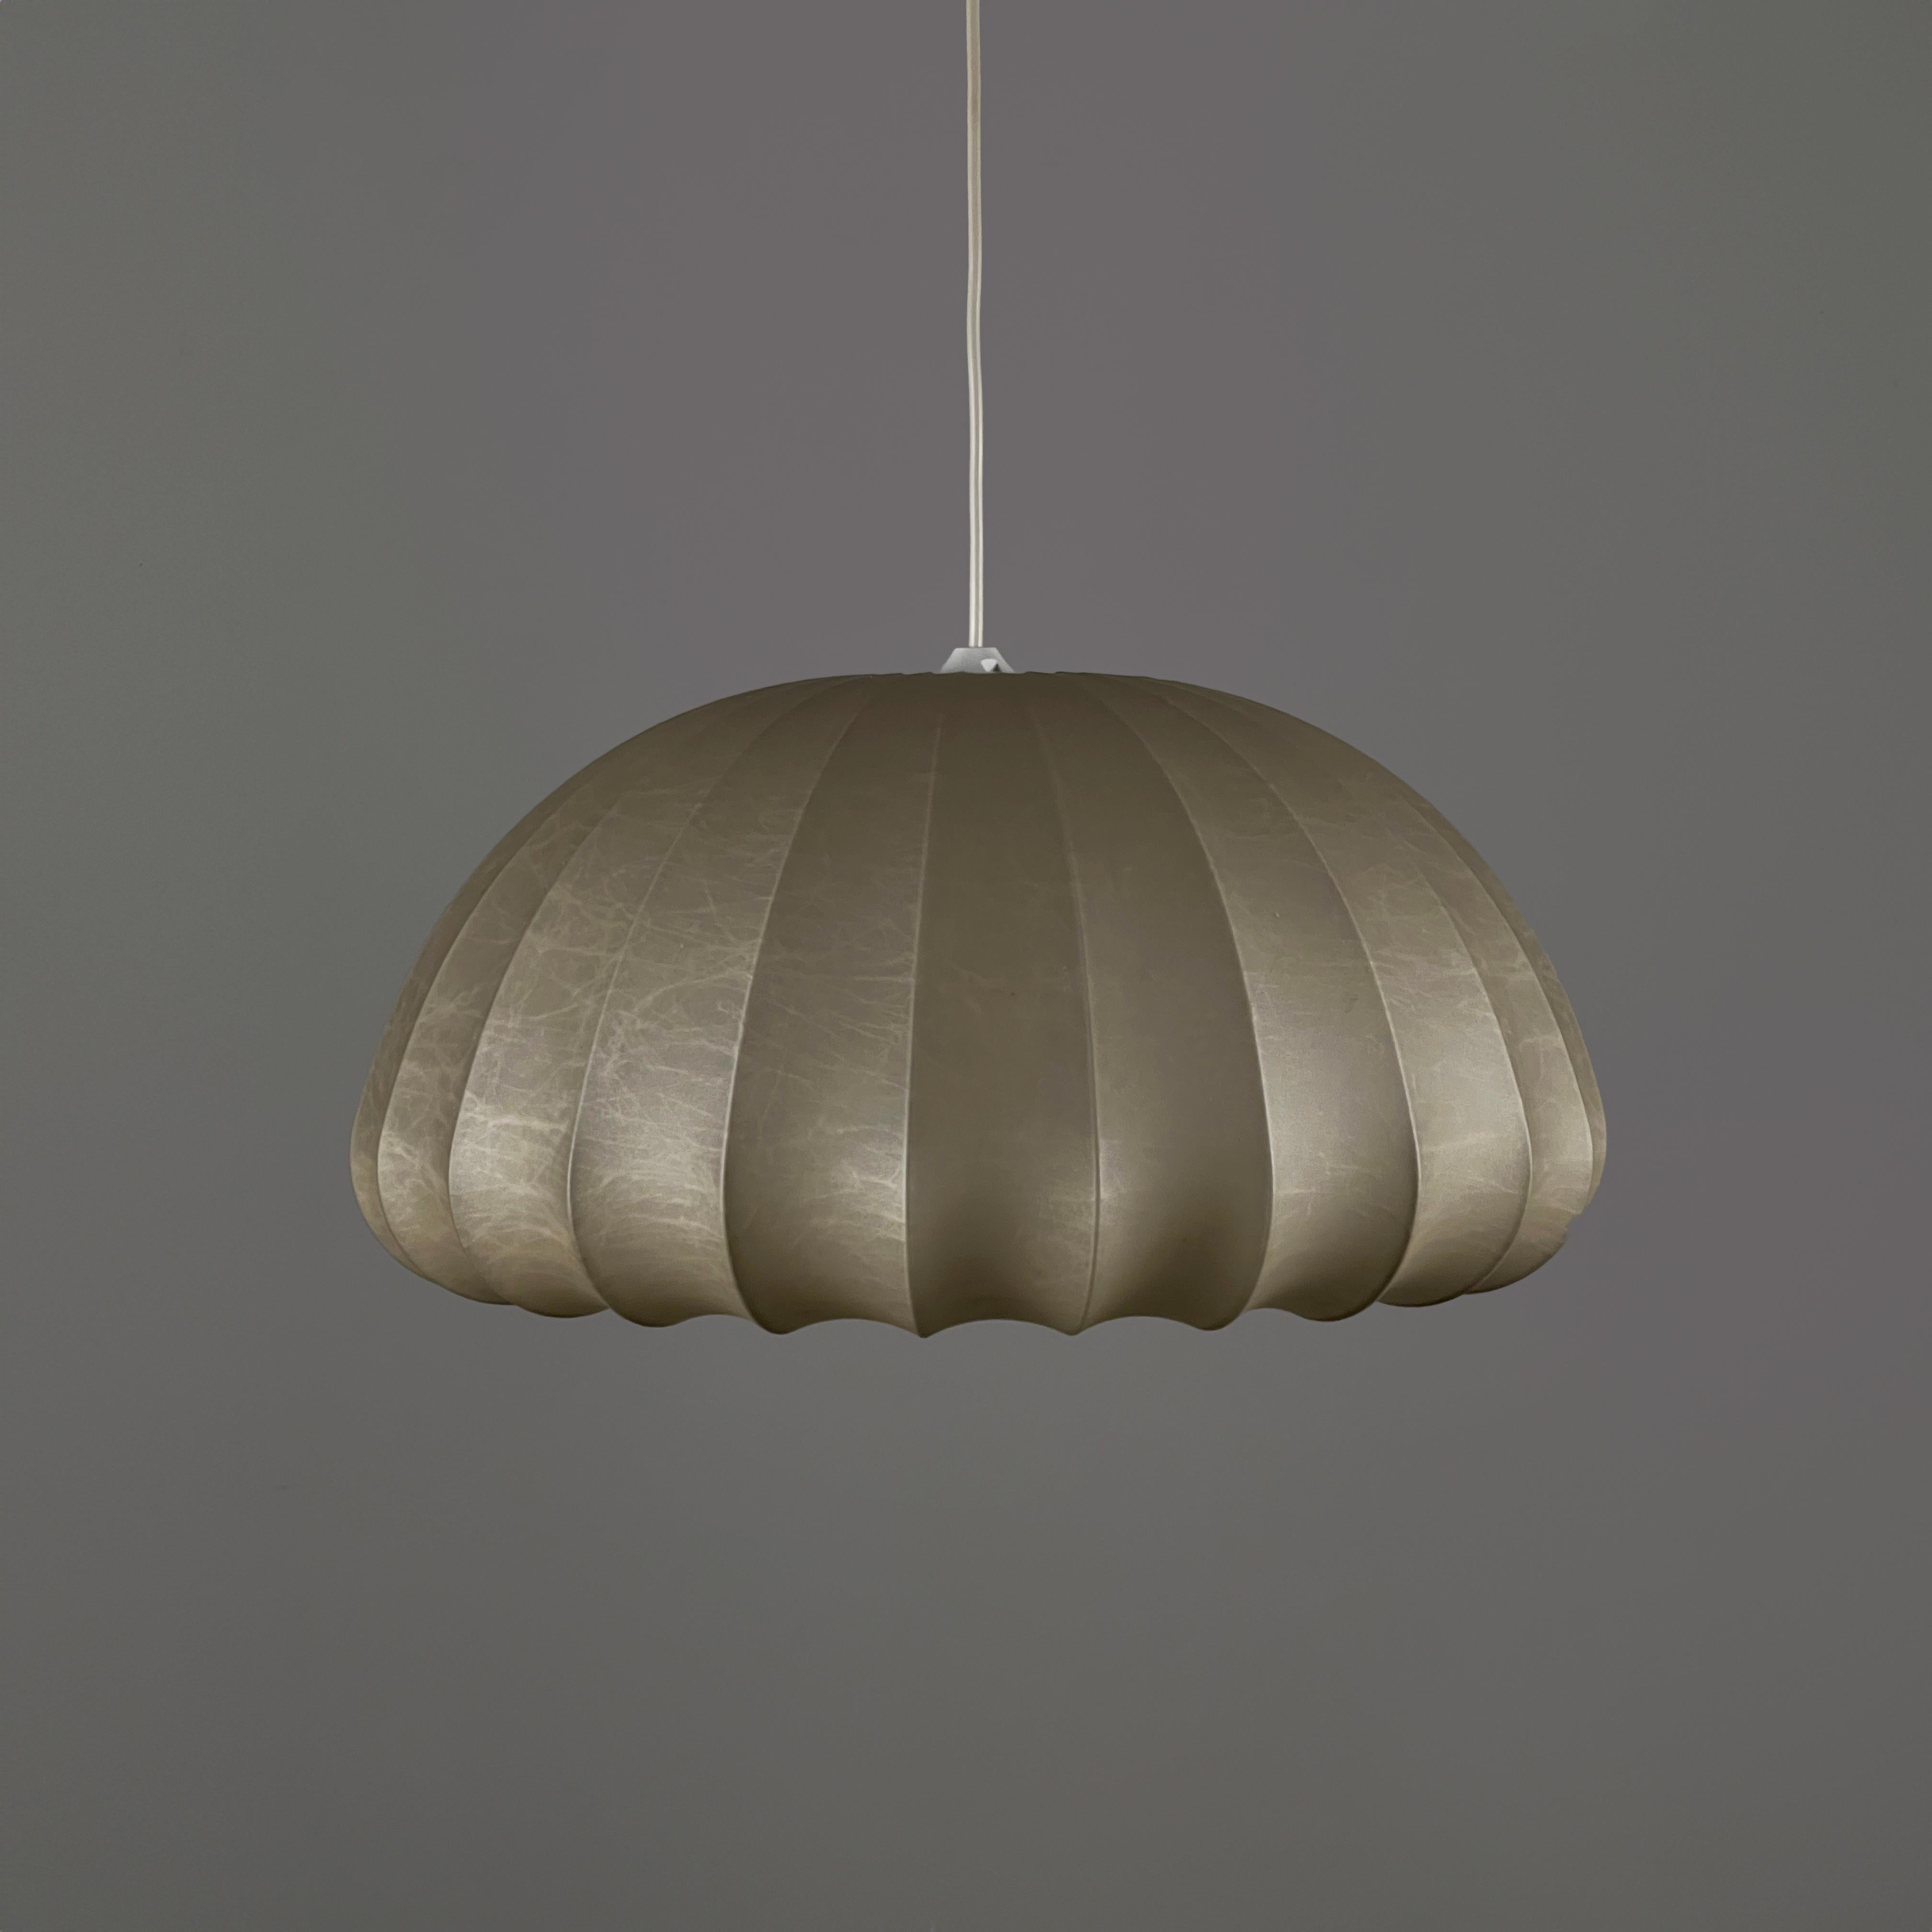 Cocoon chandelier designed by Friedel Wauer for Goldkant Leuchten, Germany 1970s For Sale 2